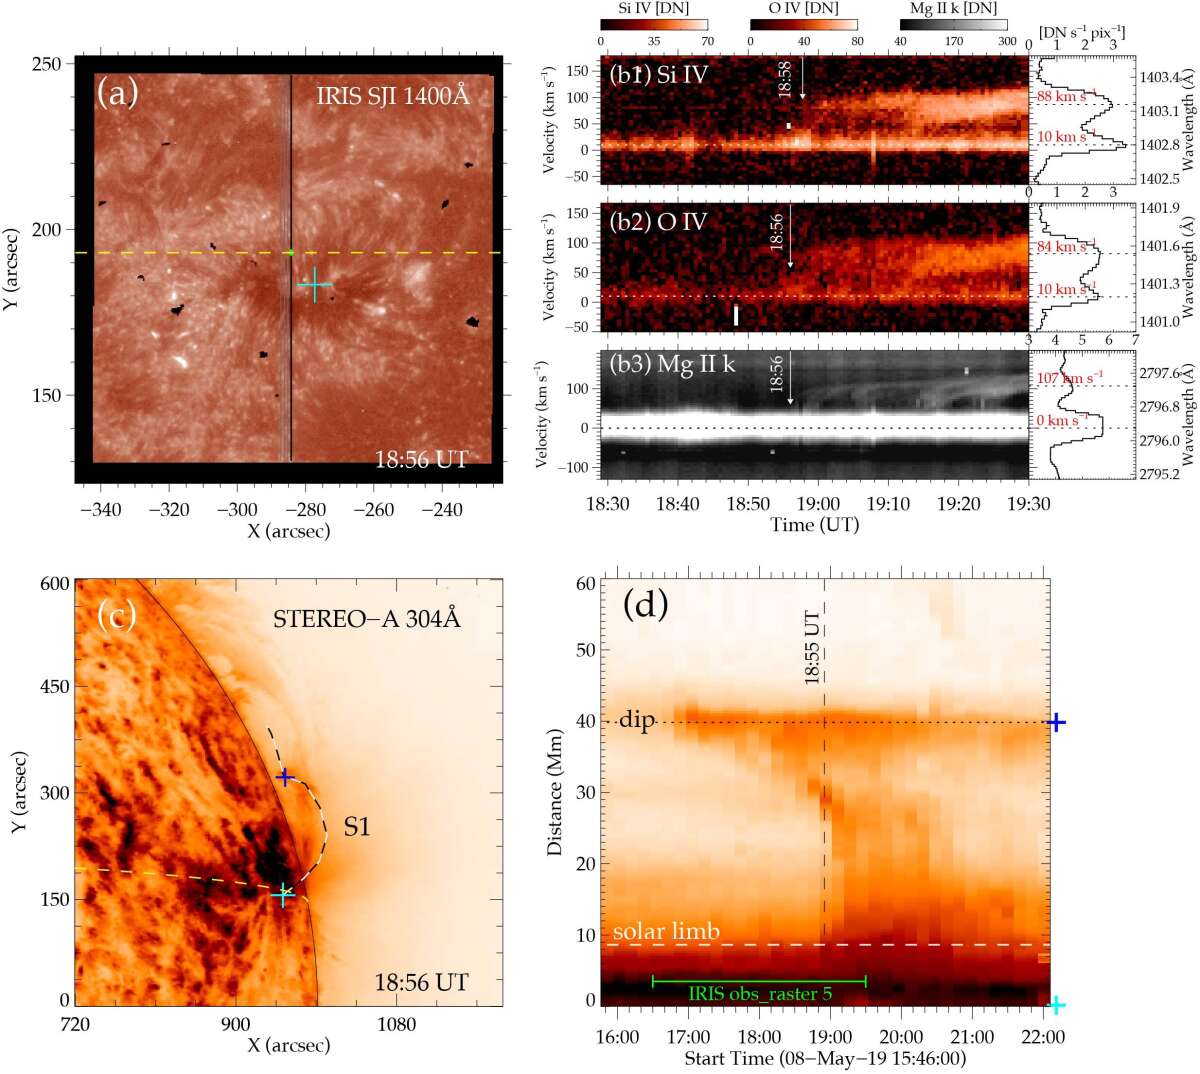 Scientists identify source of supersonic downdrafts into sunspots